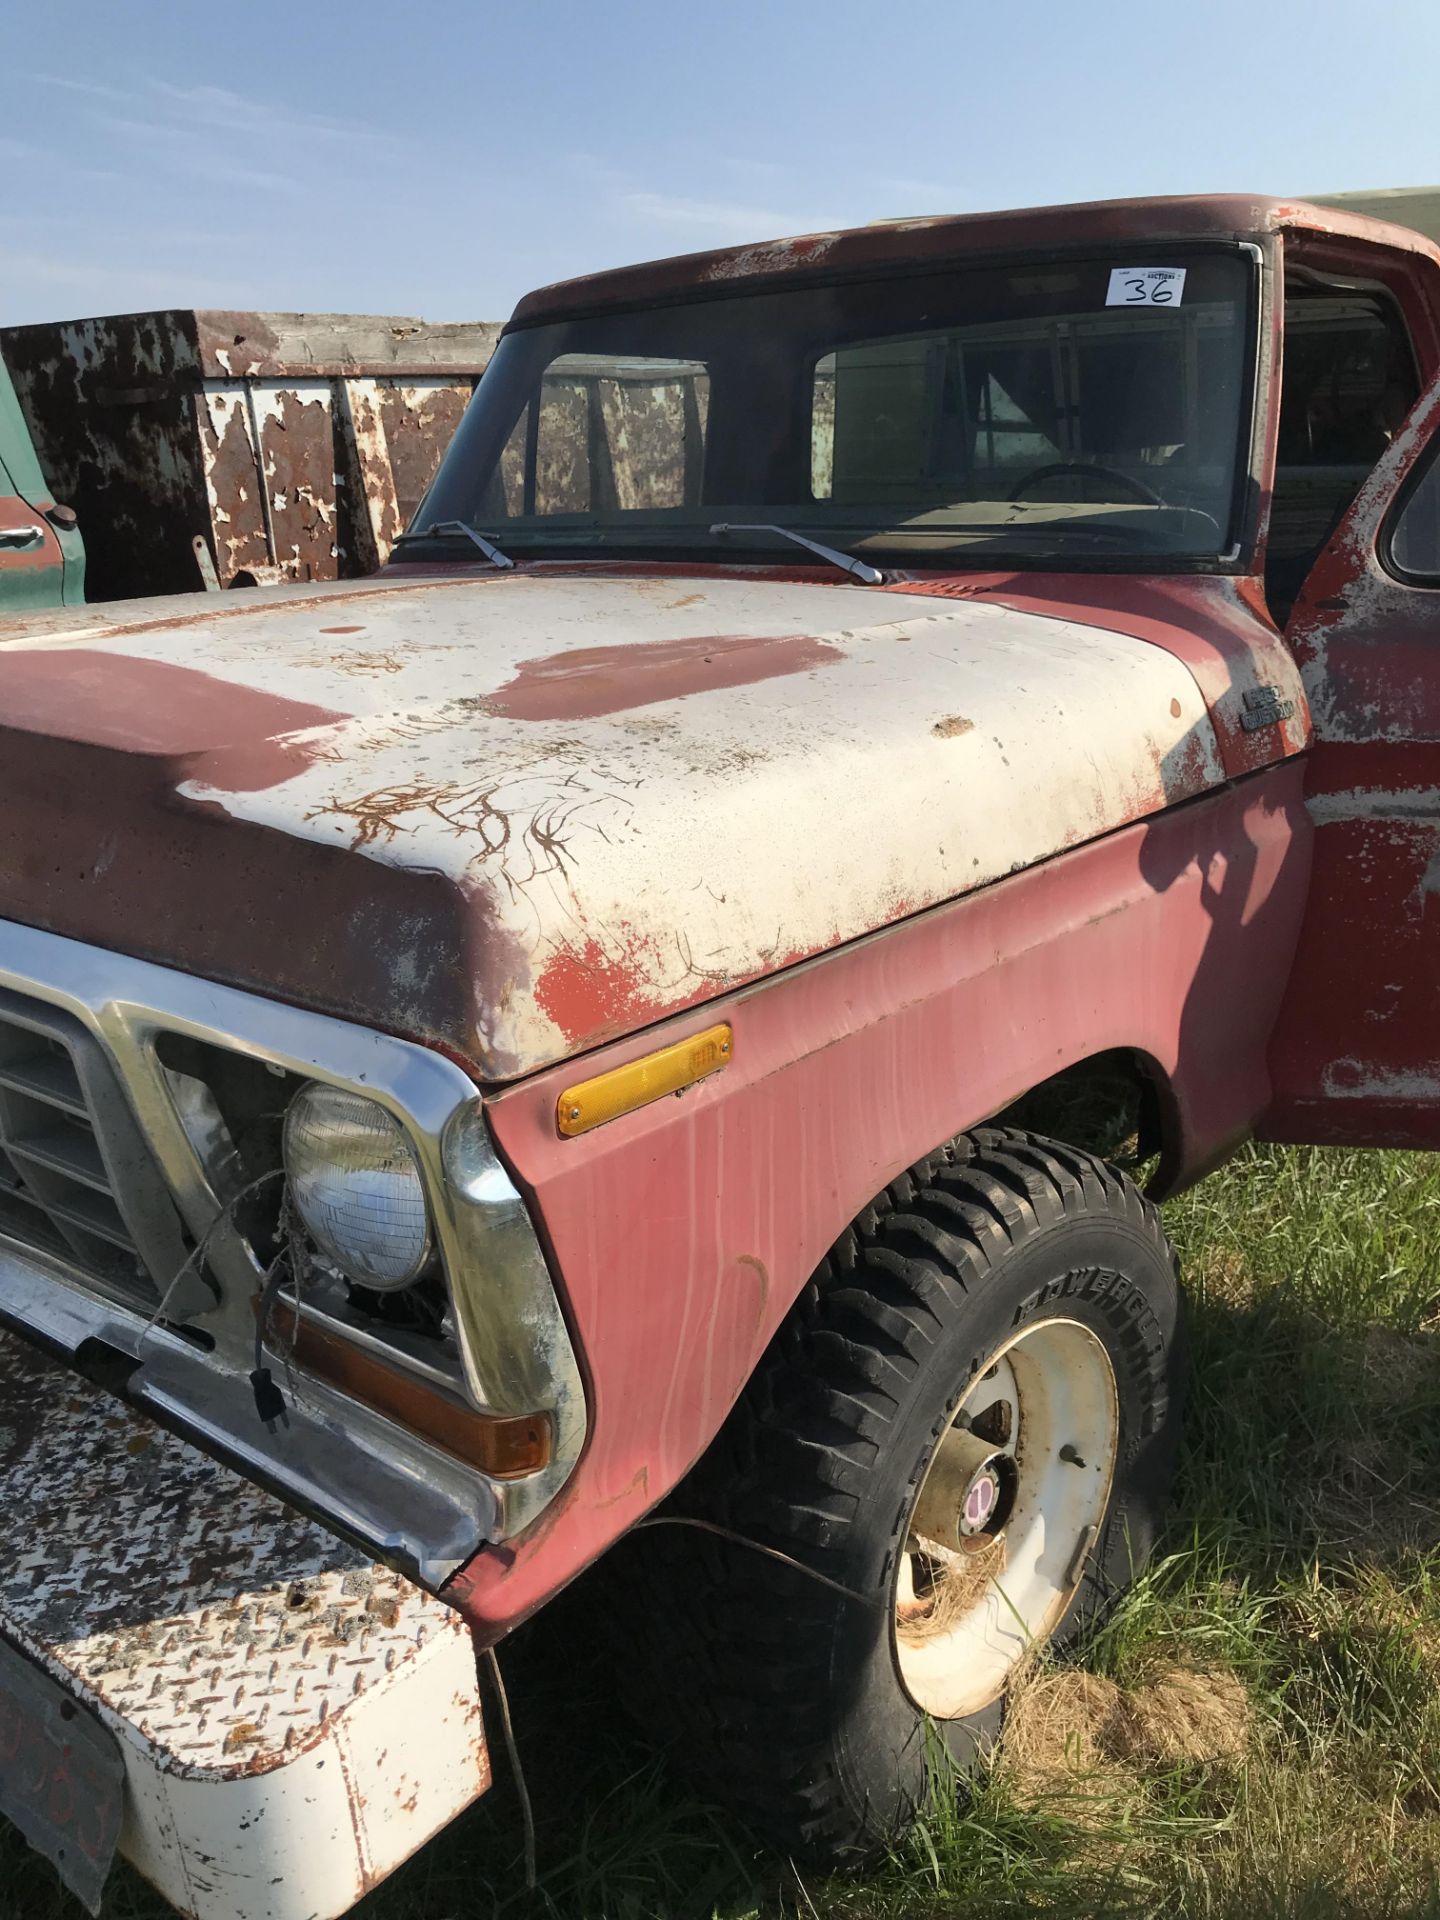 1978 Ford F250 3/4 ton, Red, 32842 km. sn:20HBGE7709 - Image 2 of 5